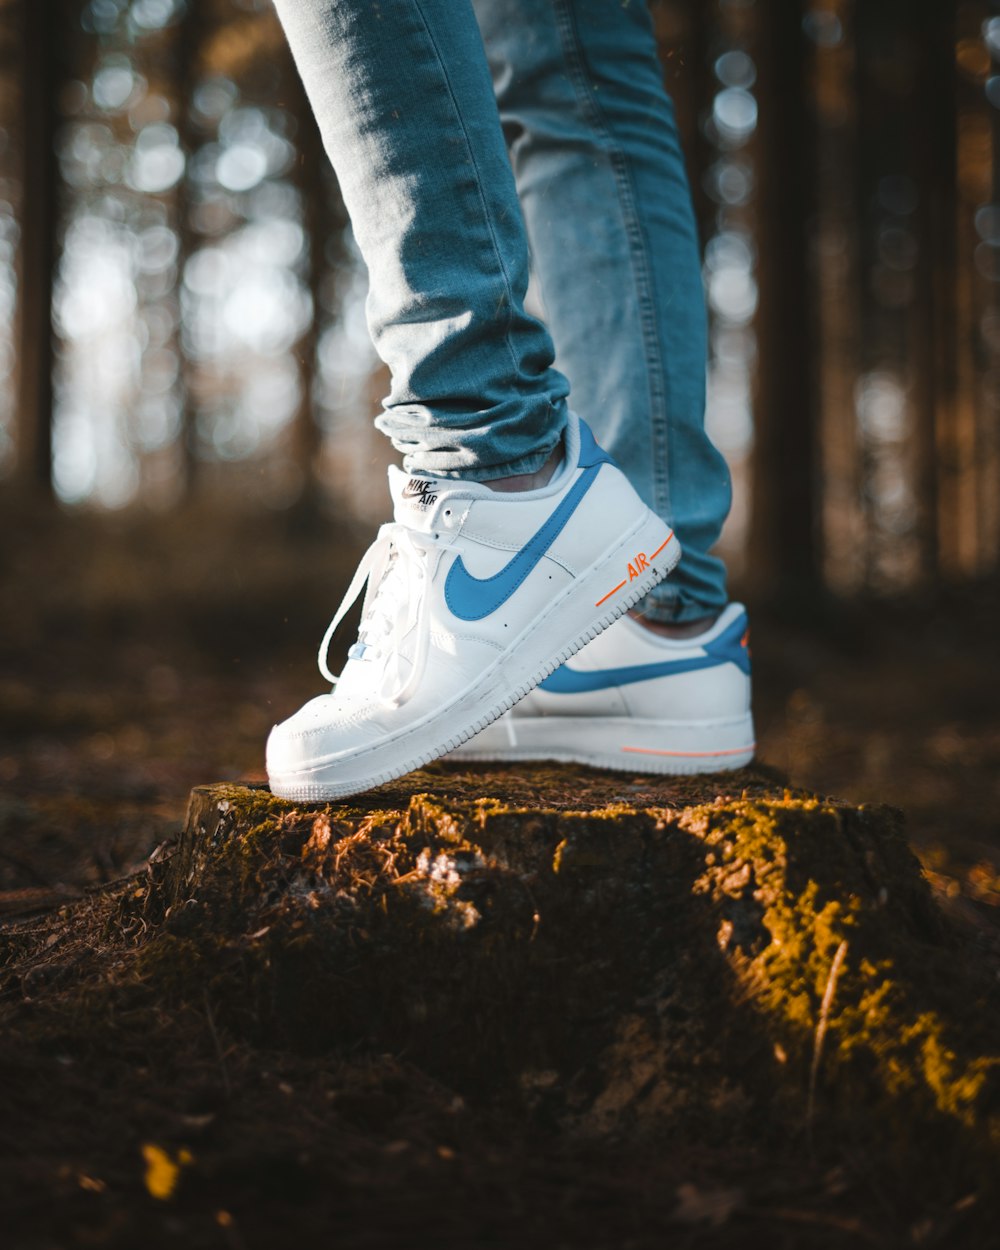 Person wearing blue denim jeans and white nike air max shoes standing on  tree stomp photo – Free Custom Image on Unsplash